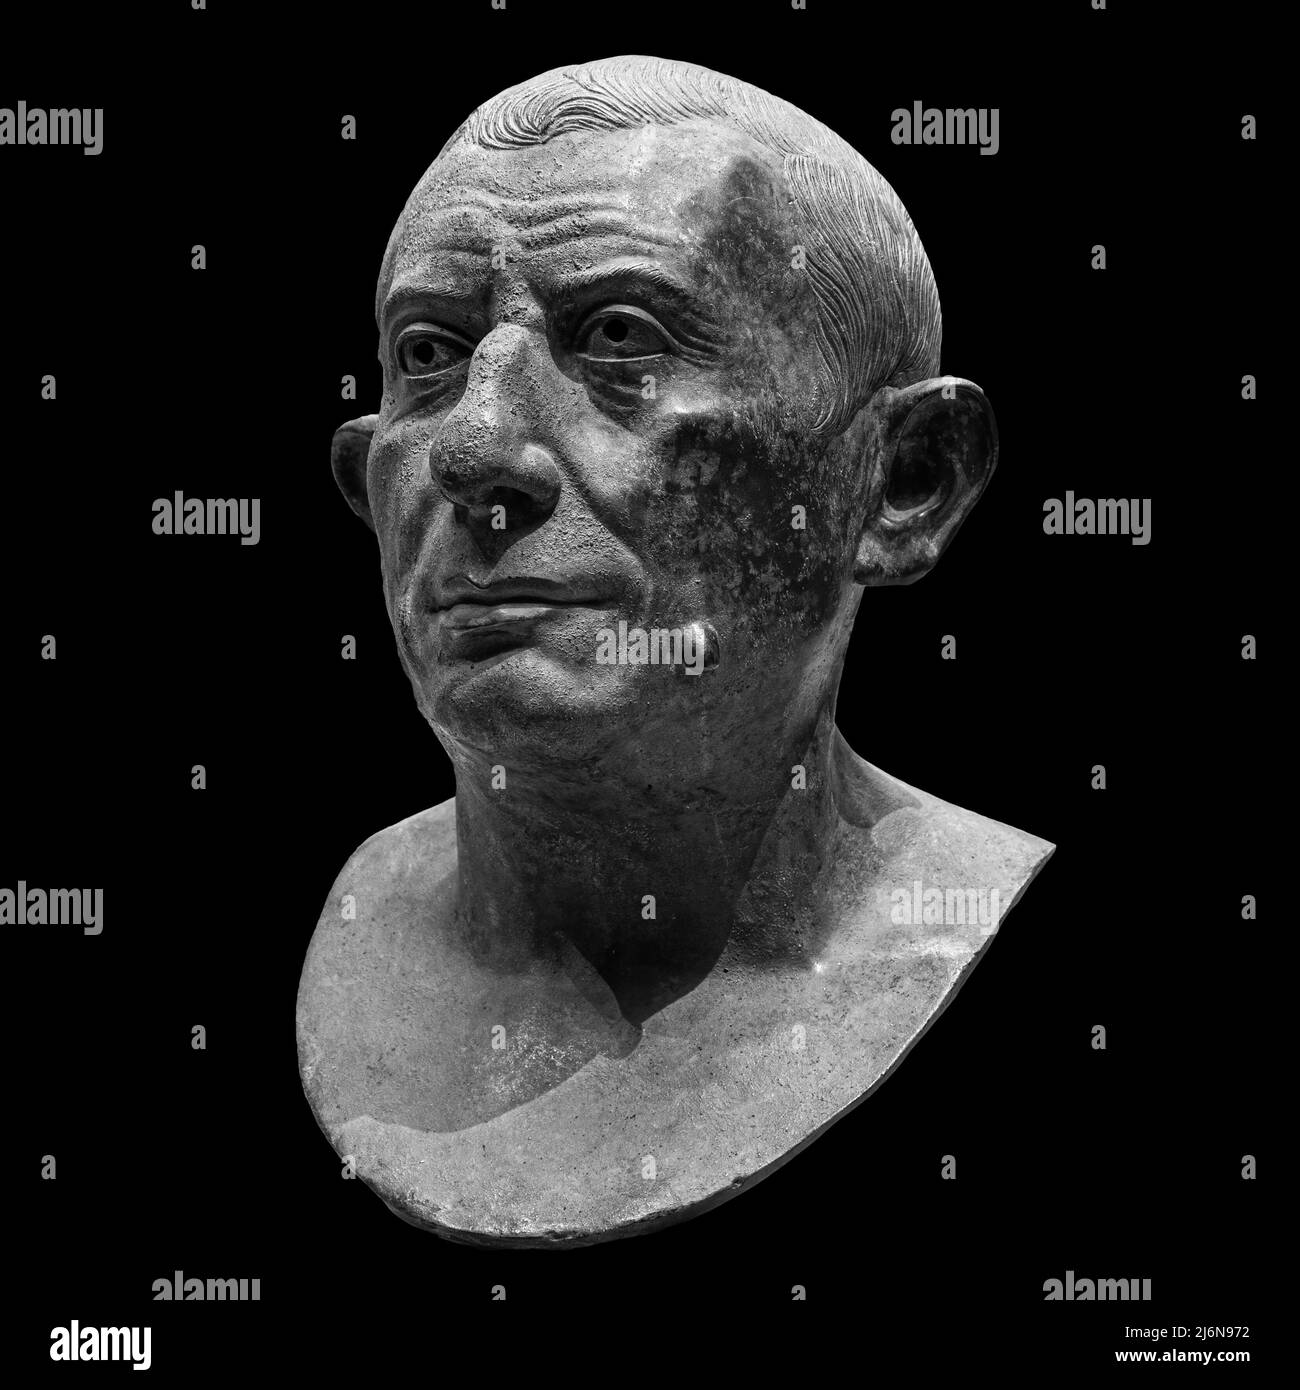 Copy of ancient statue Lucius Caecilius Iucundus. Head and shoulders detail of the ancient man sculpture. Antique face statue isolated on black Stock Photo